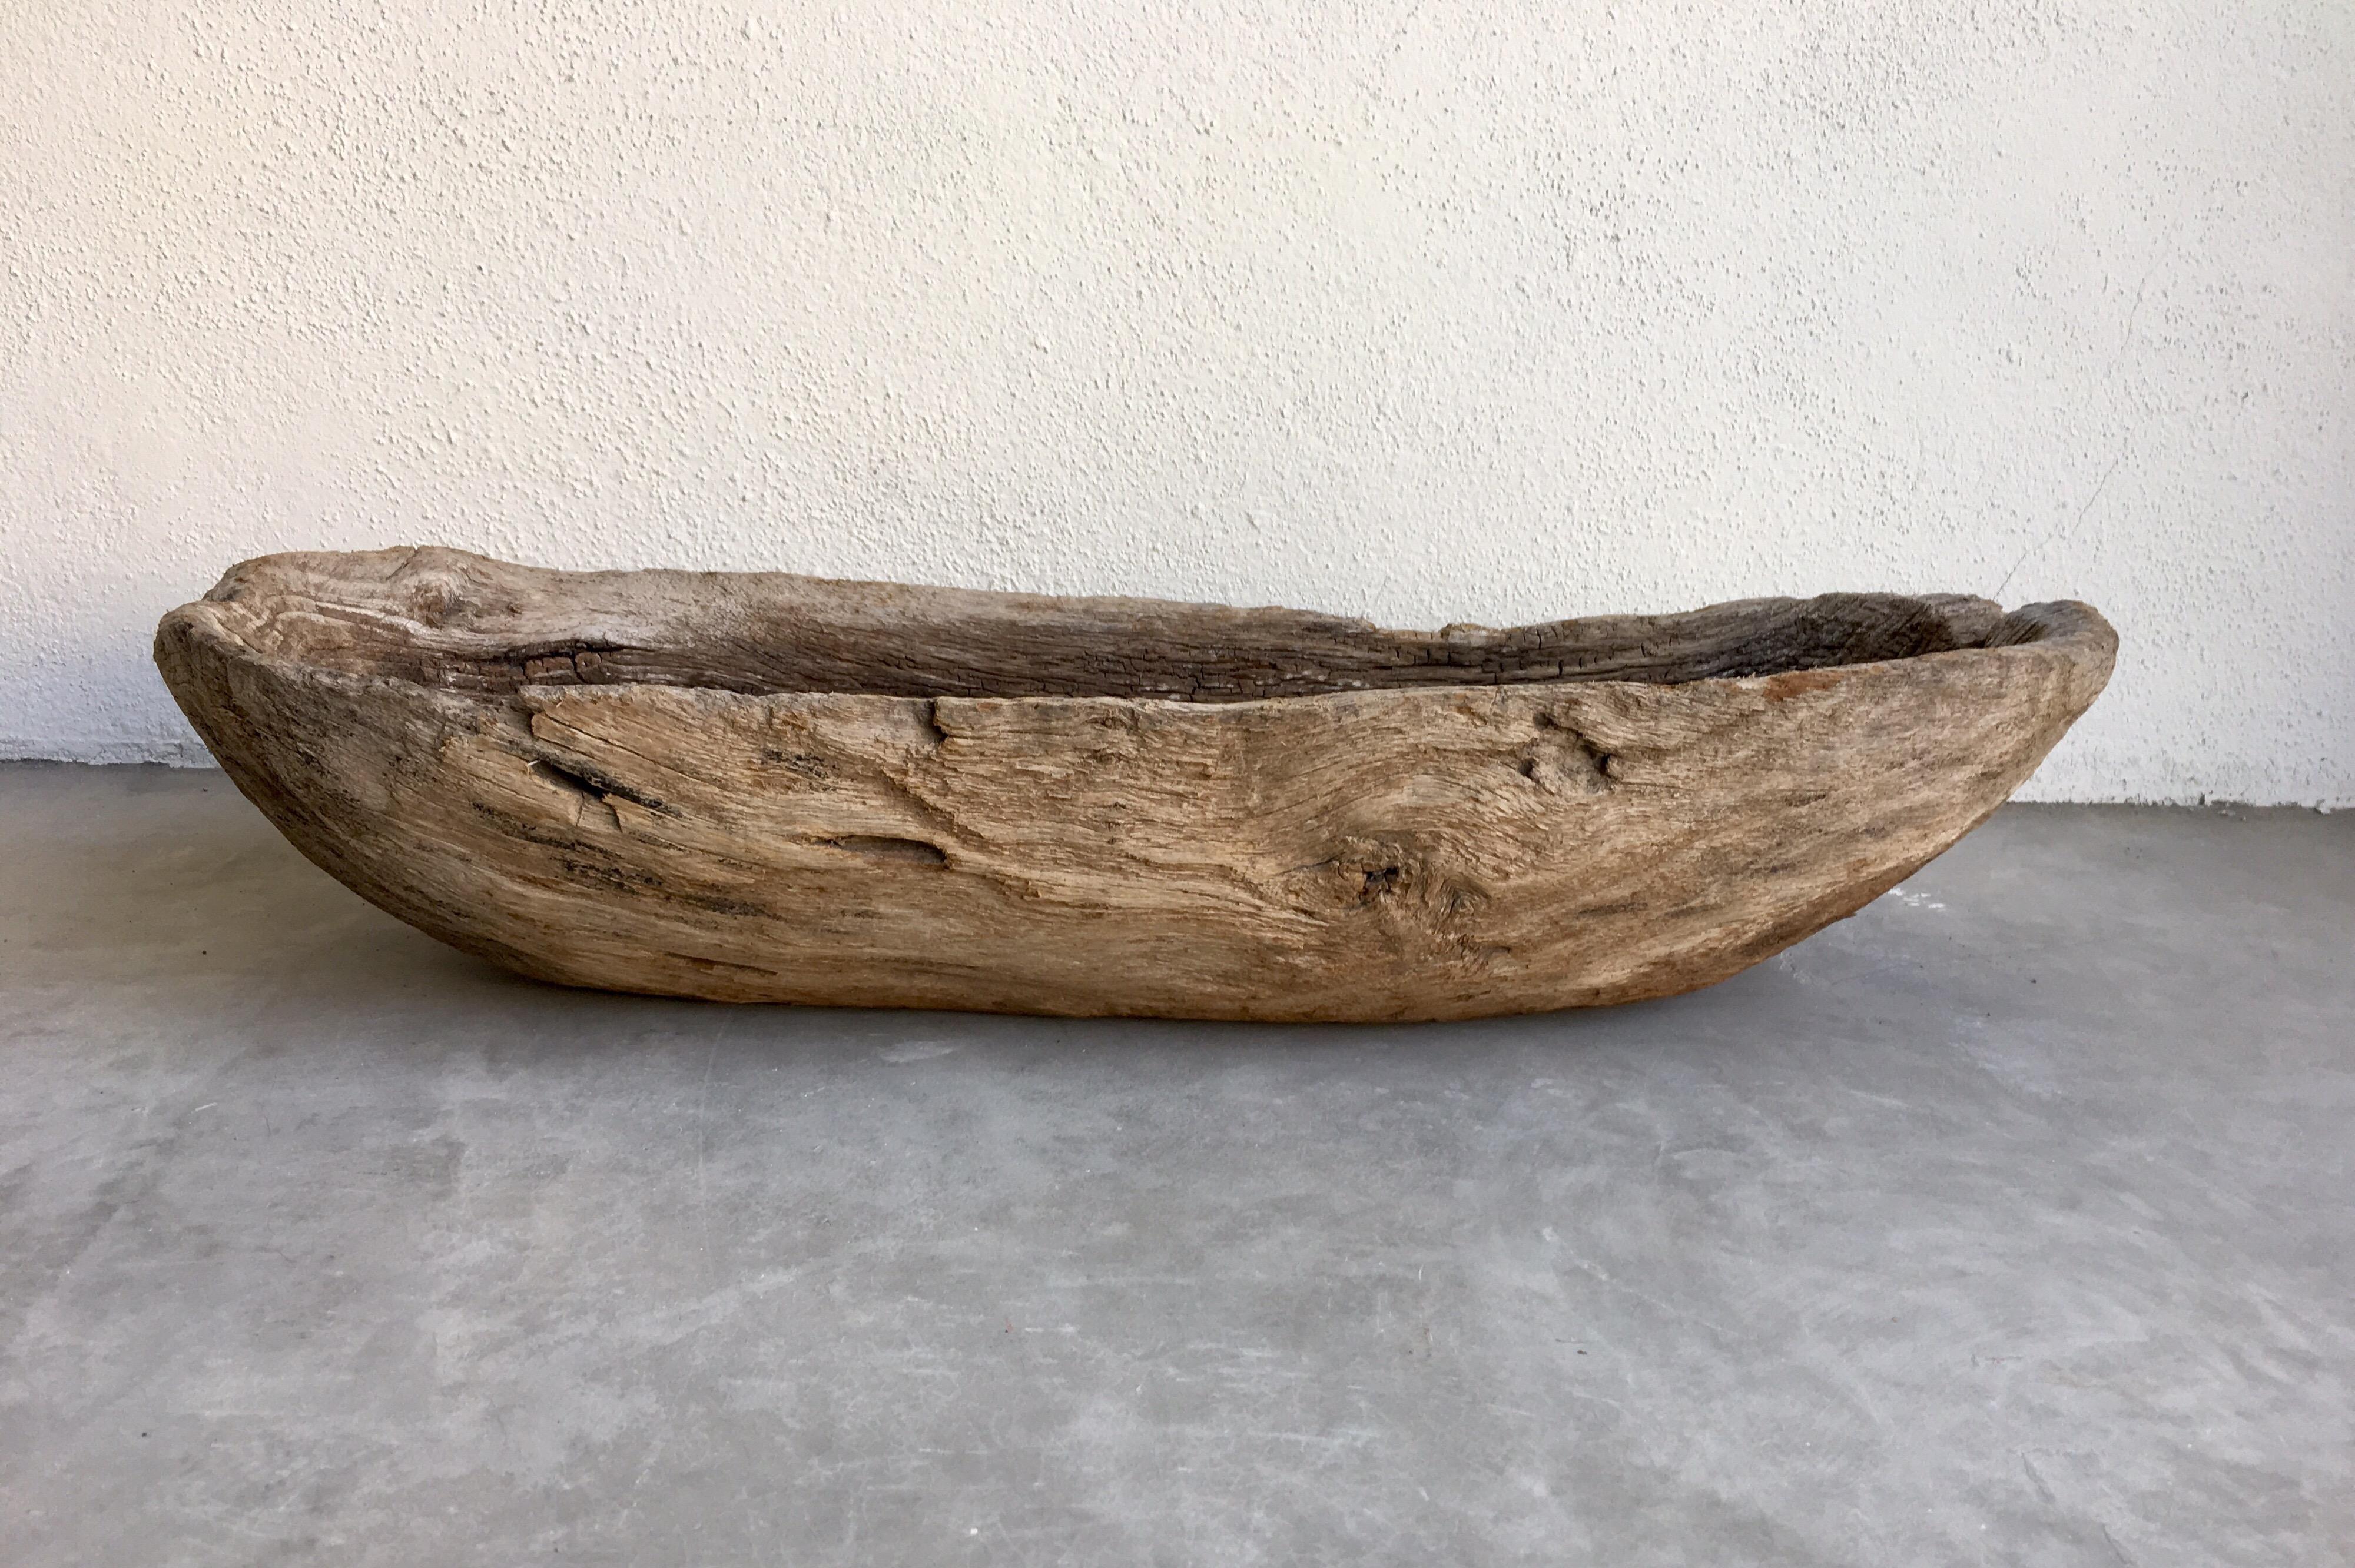 Hand-Carved Mesquite Bowl from Mexico